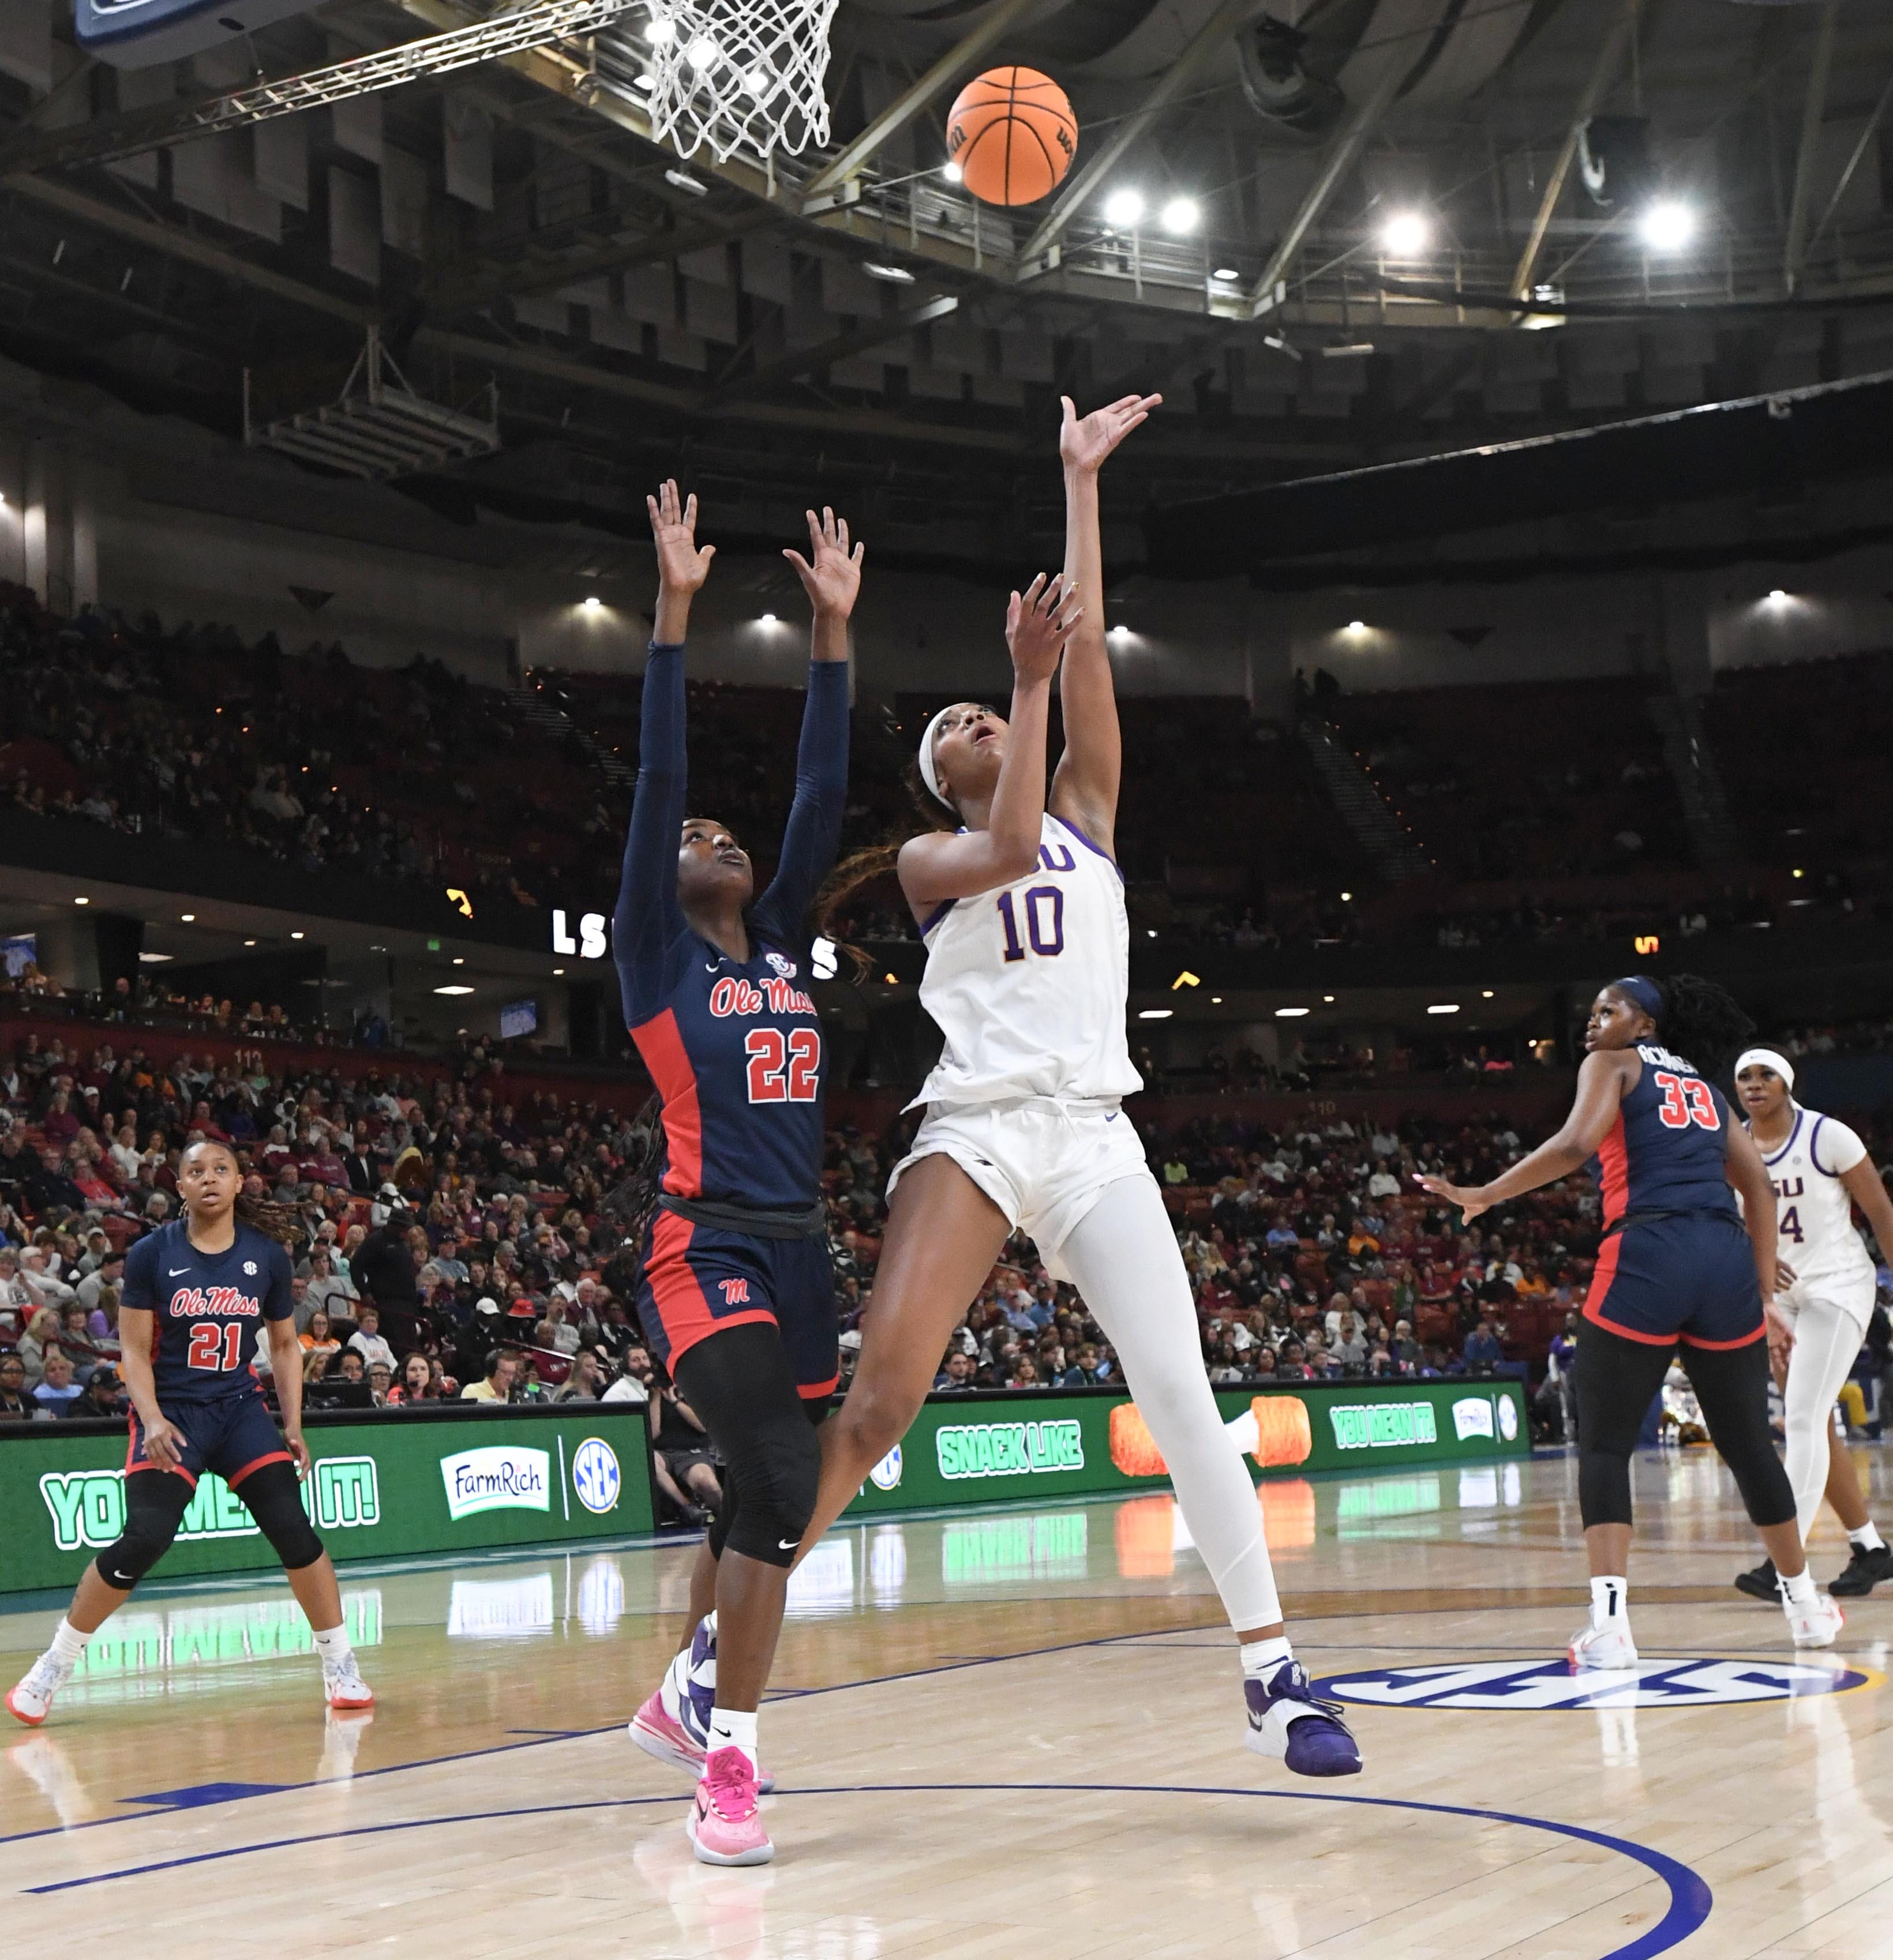 Louisiana State University forward Angel Reese (10) scores near Ole Miss forward Tyra Singleton (22) during the first quarter of the SEC Women's Basketball Tournament game at the Bon Secours Wellness Arena in Greenville, S.C. Saturday, March 9, 2024.